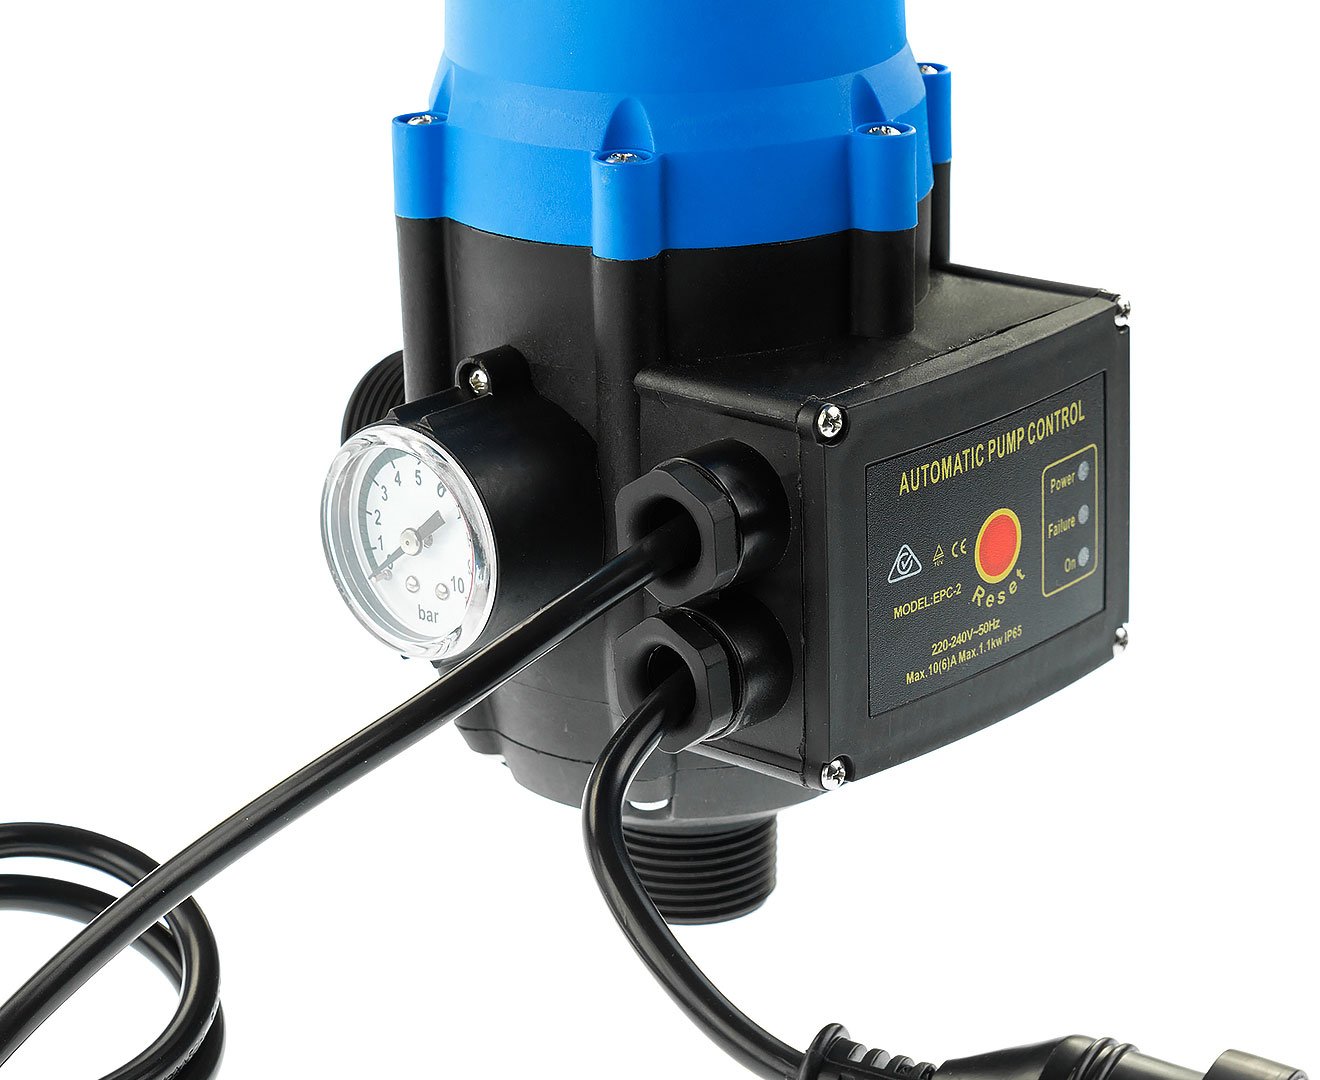 Water Pump Controller, Adjustable Pressure Switch, Electric, Electronic